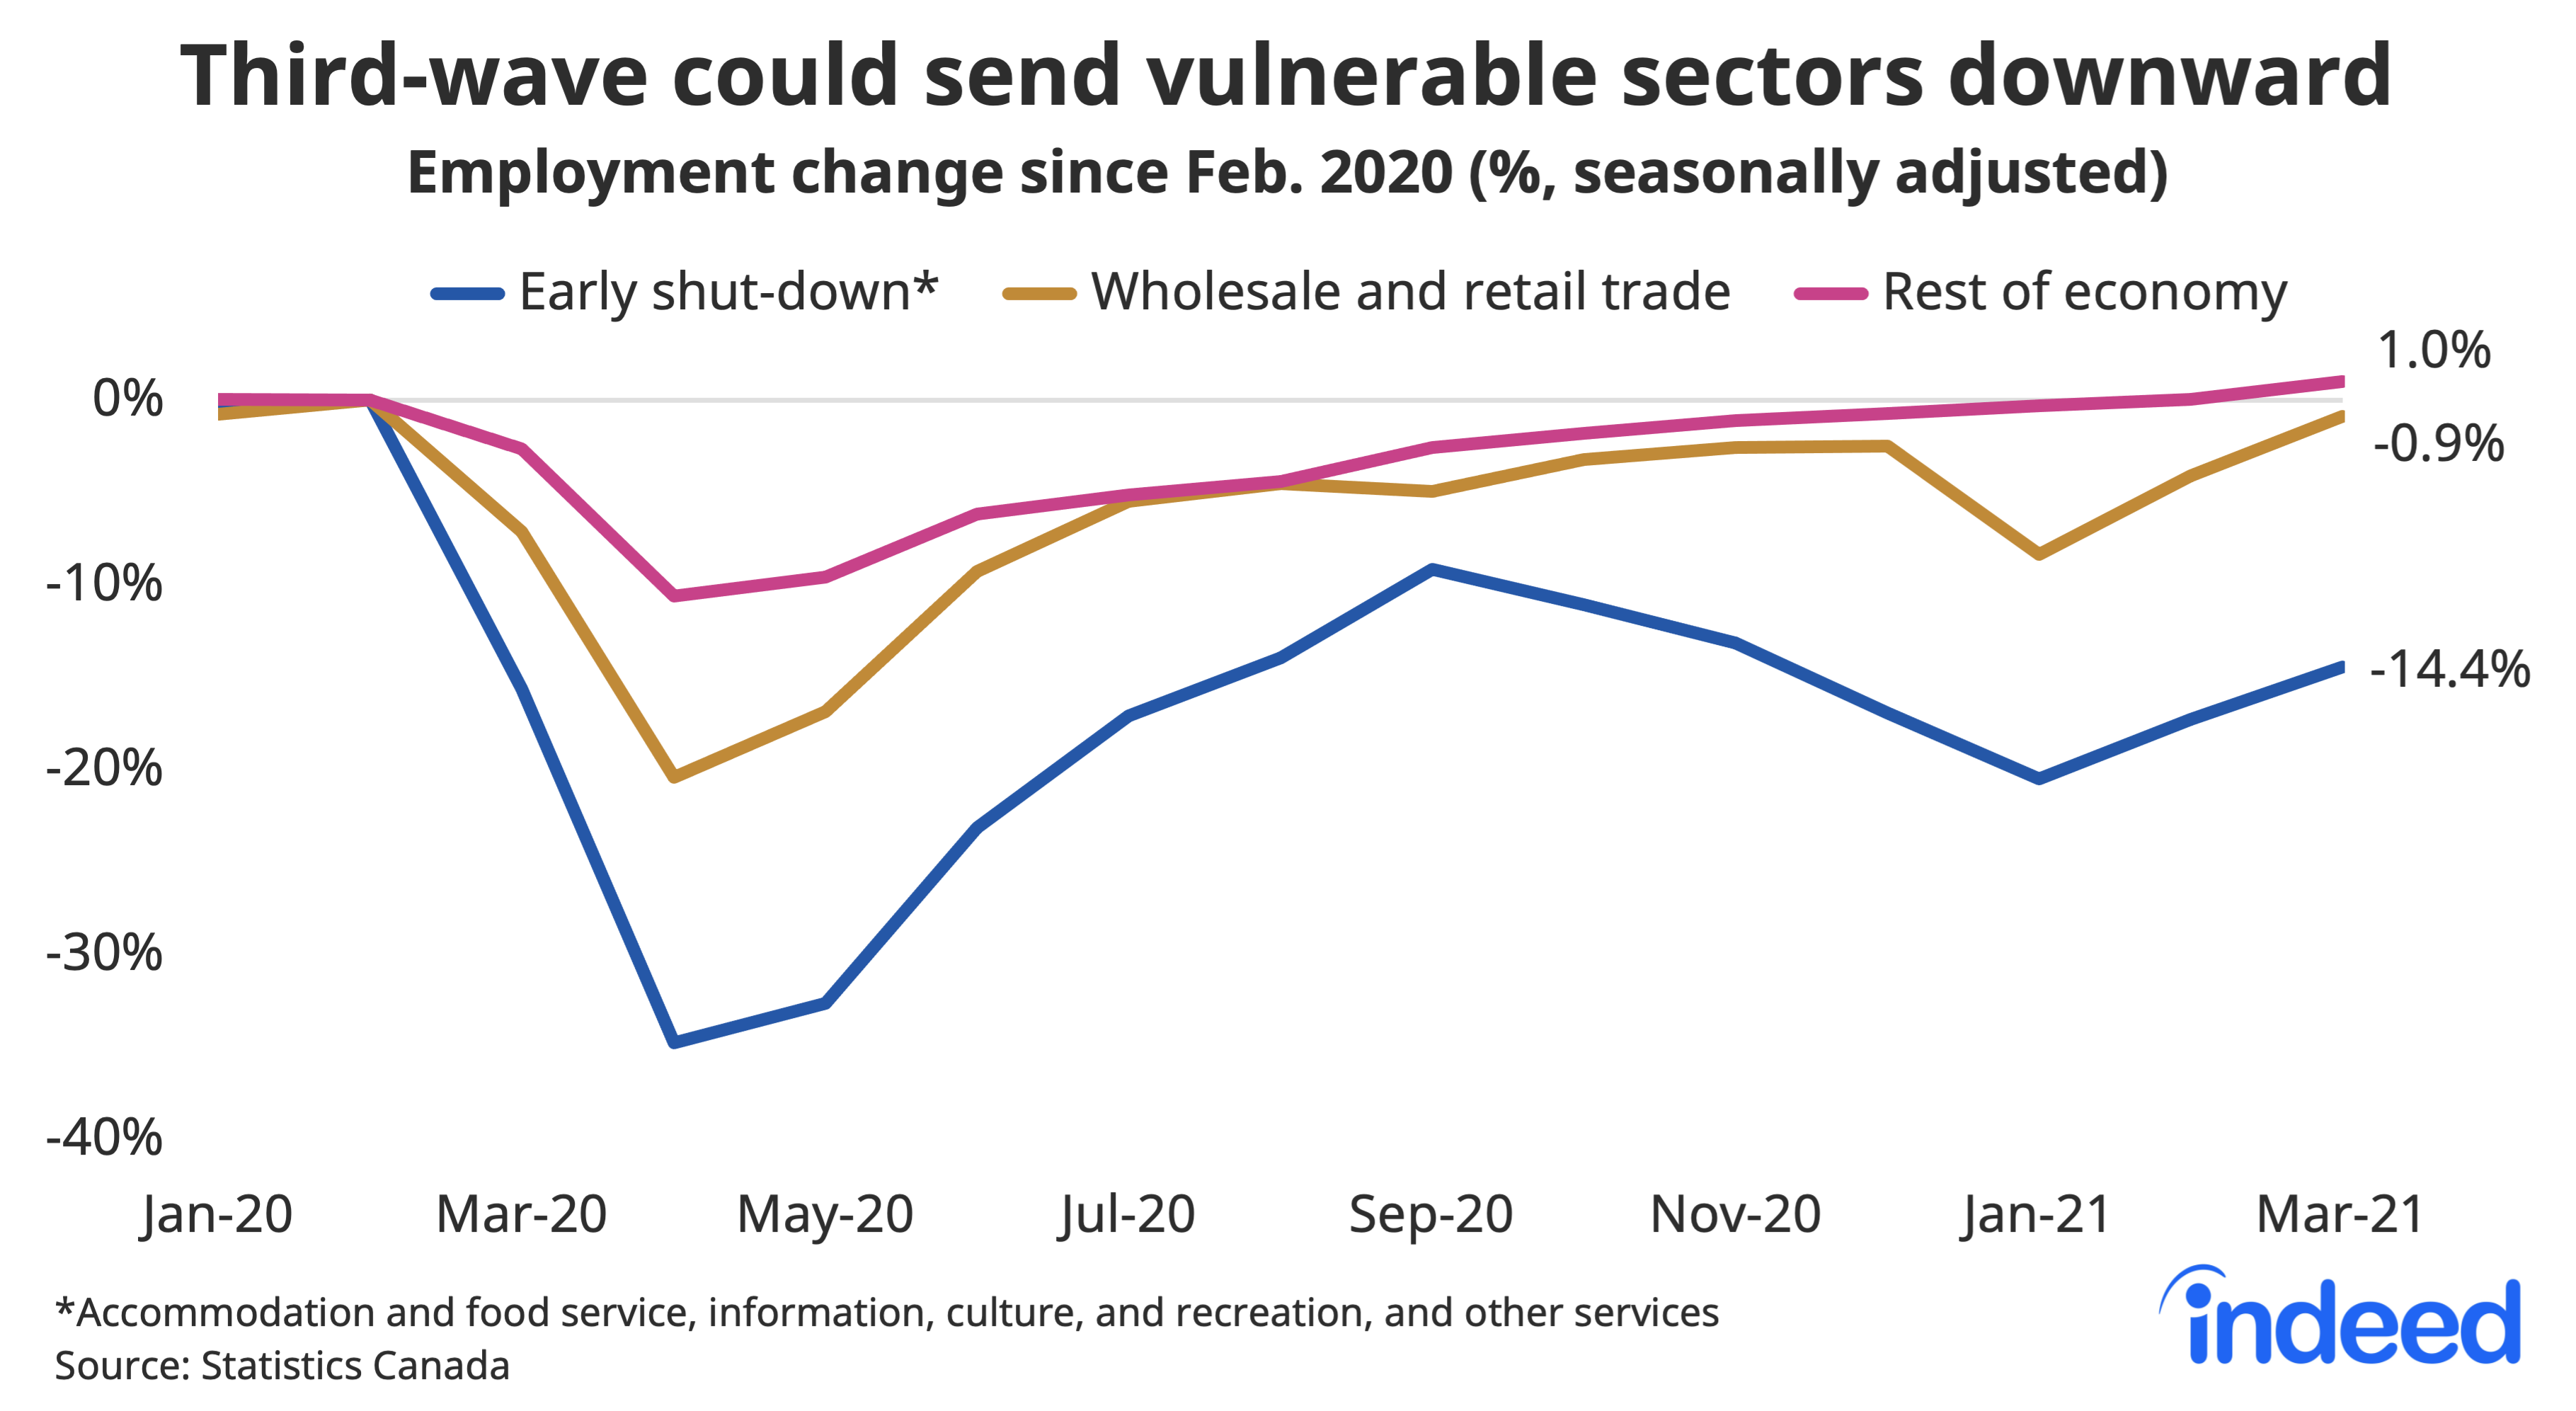 Line graph titled “Third-wave could send vulnerable sectors downward.” With a vertical axis ranging from -40% to 0%, Indeed tracked the employment change along a horizontal axis ranging from January 2020 to March 2021 with lines representing “early shut-down,” “wholesale and retail trade,” and “rest of economy.” As of April 2021, early shut-down employment in accommodation and food service was at -14.4%. Caption added post-publication.